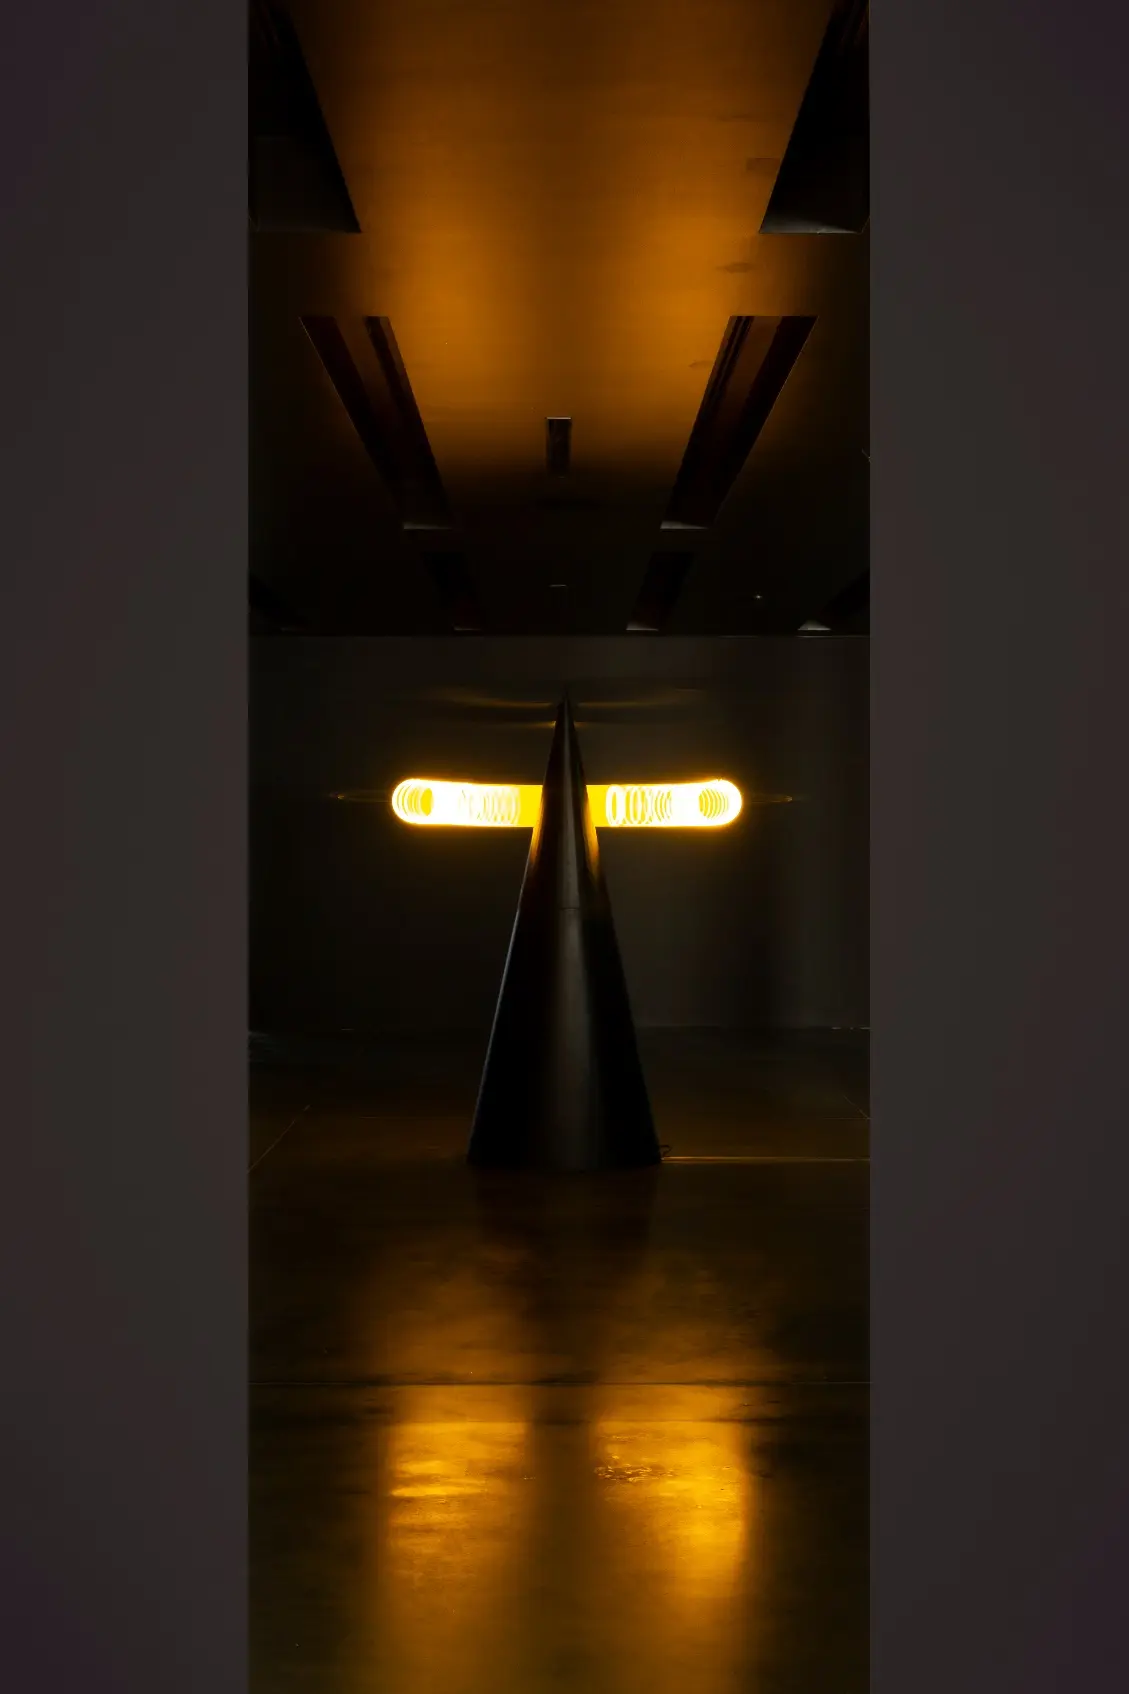 A symmetrical photograph captures a cone in a dark room radiating golden lights from its apex, which reflects captivatingly off its sides.